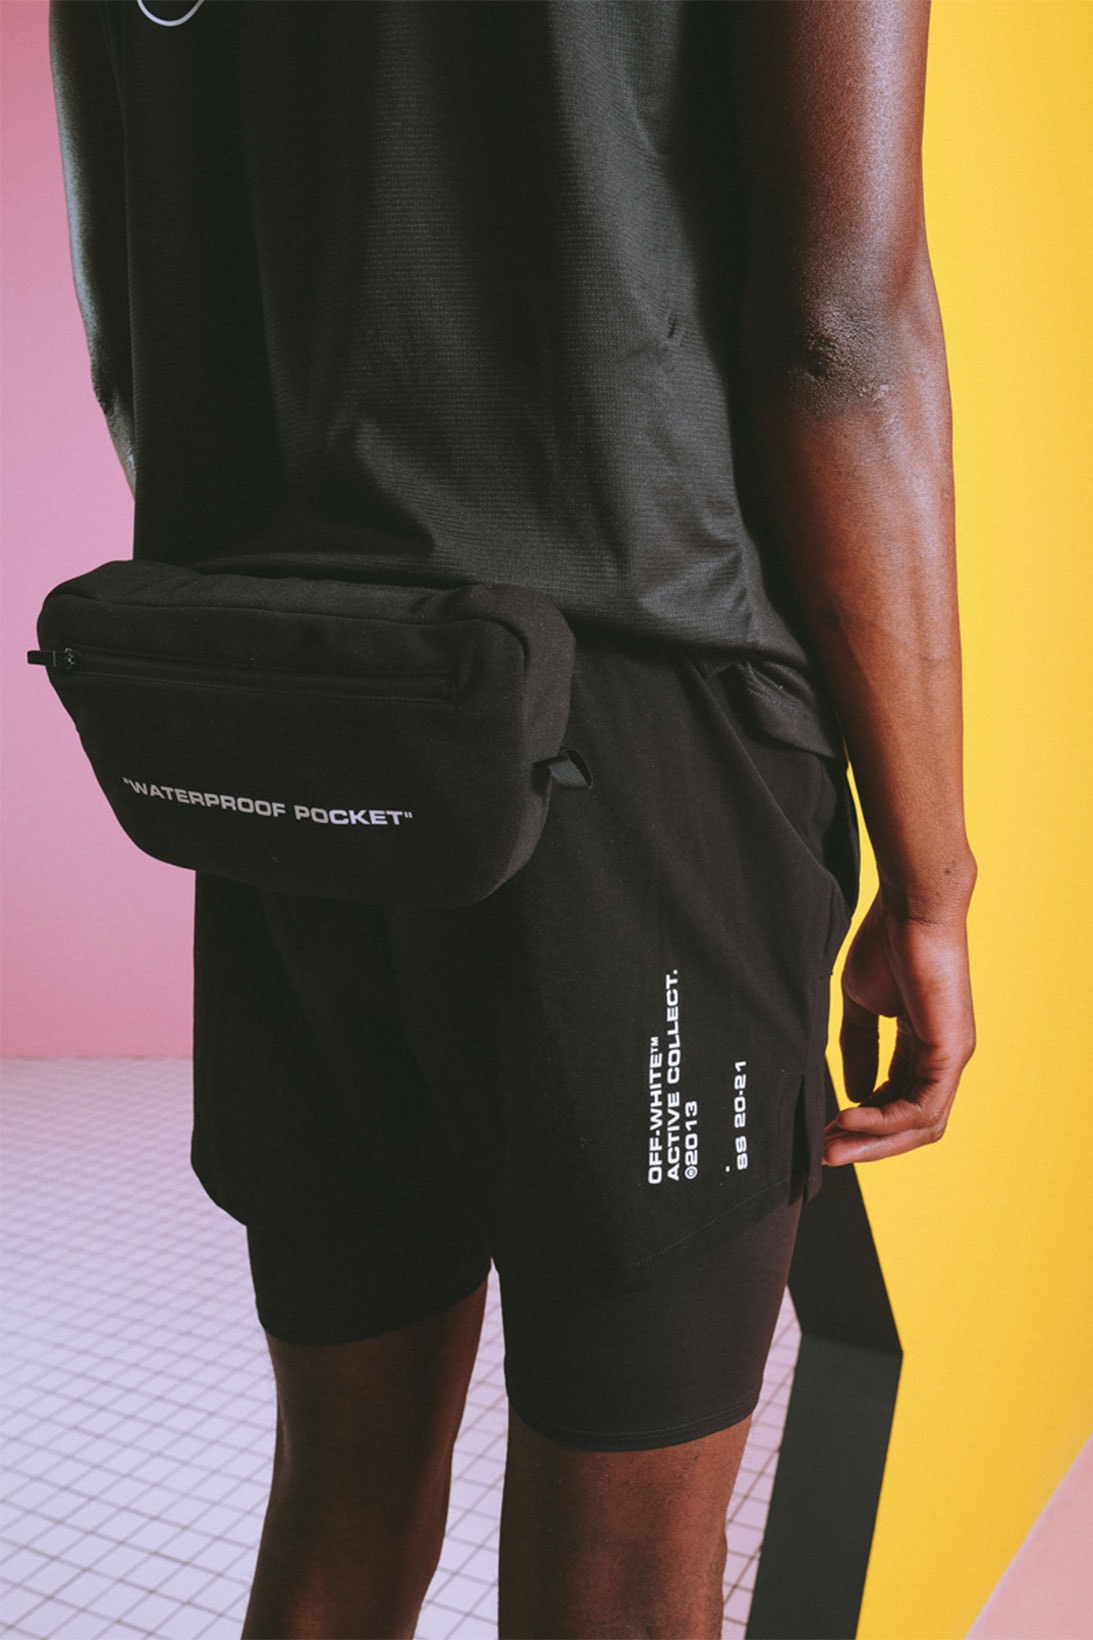 off white active collection two virgil abloh menswear fanny pack bag